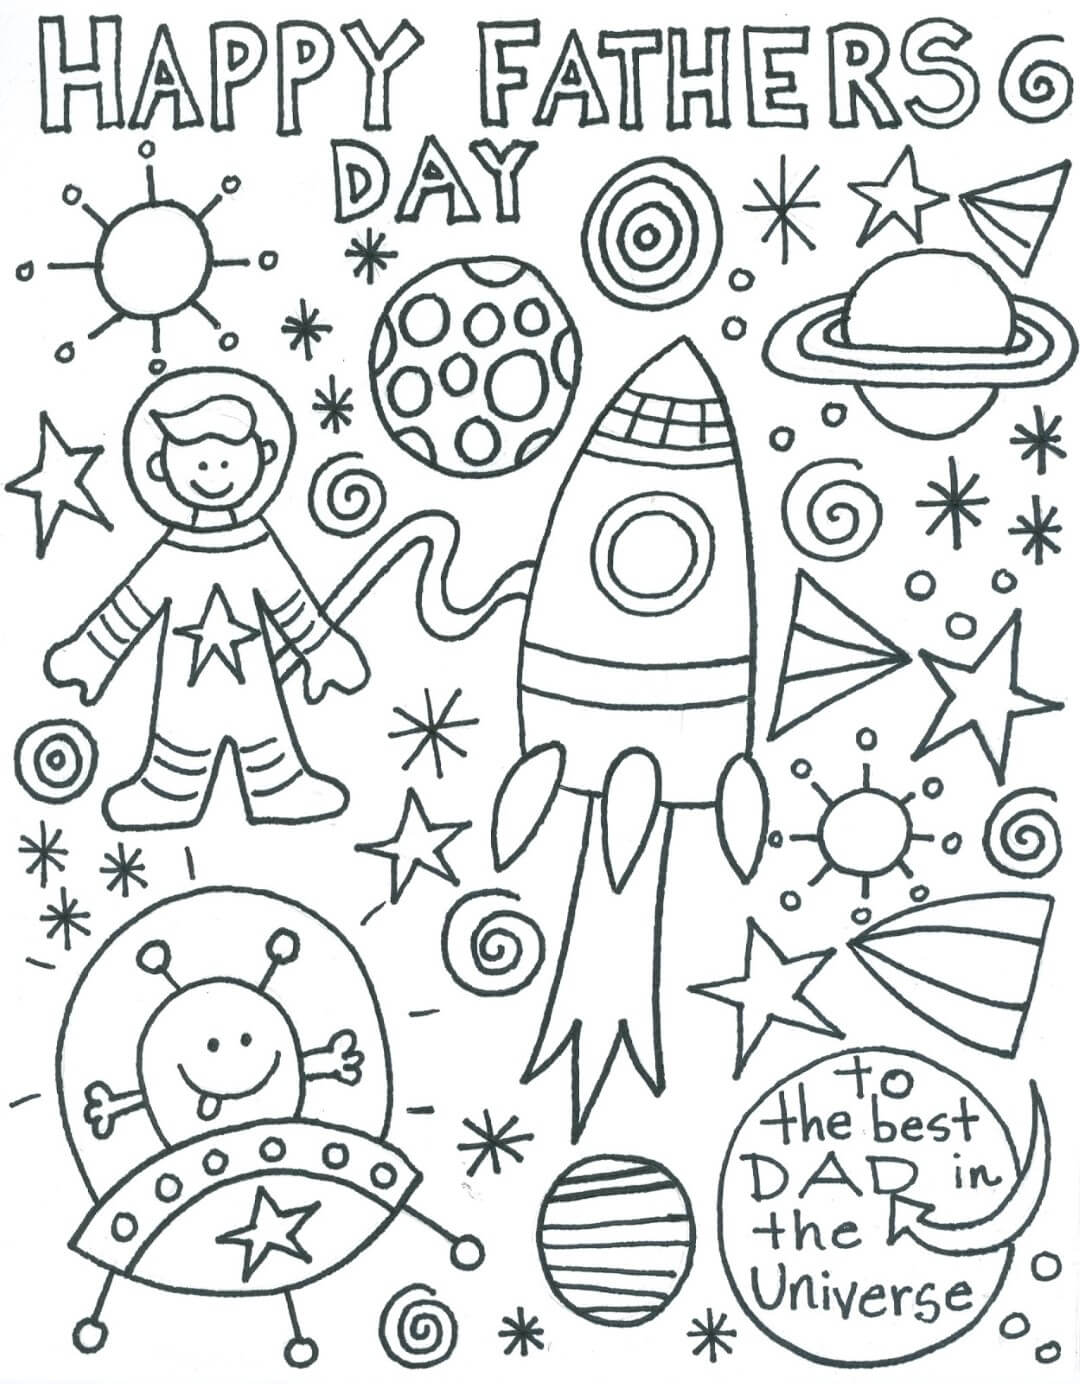 Best Dad In The Universe Coloring Page